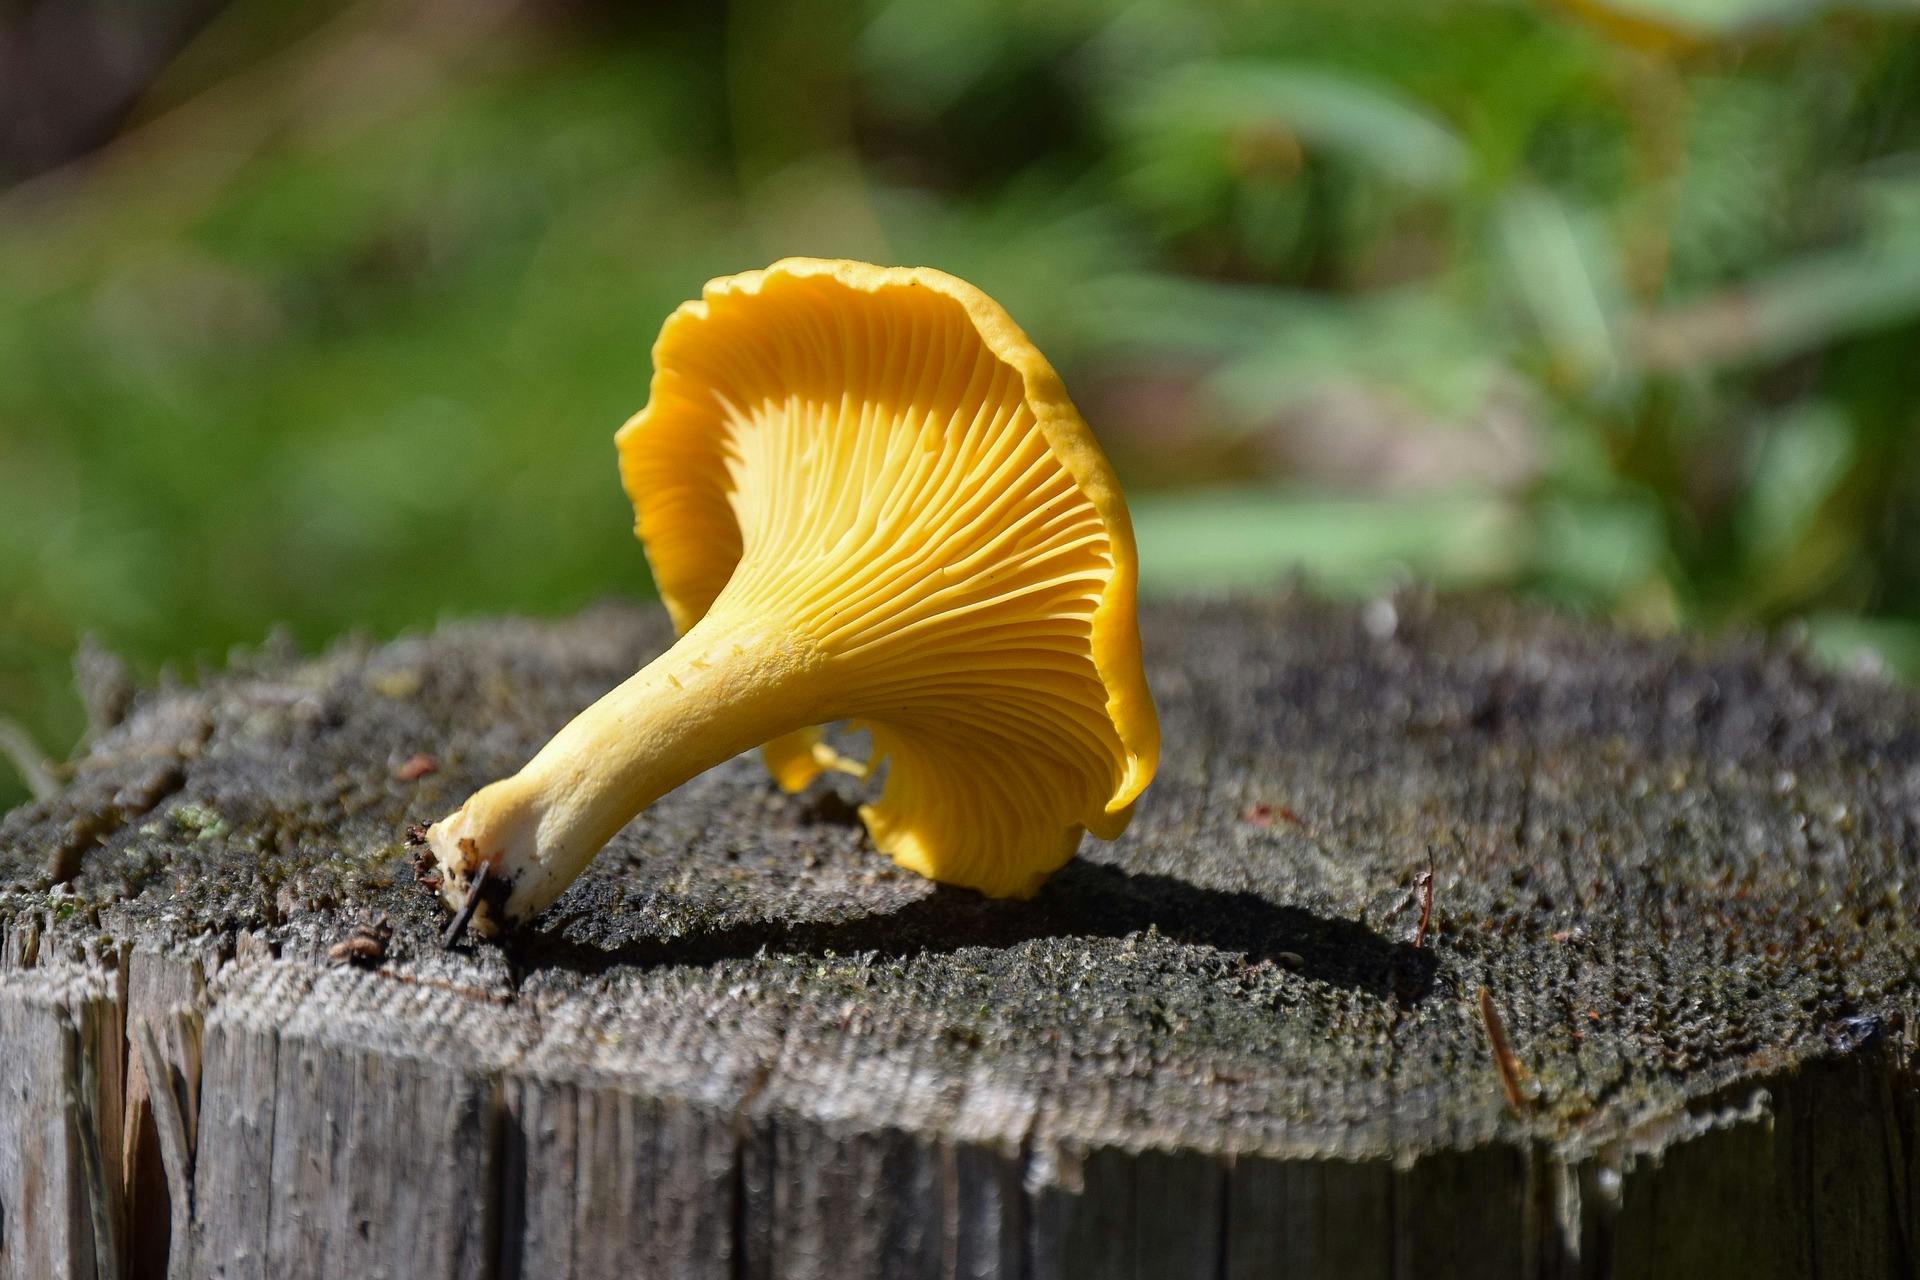 From Soups to Risottos: The Versatile Uses of Chanterelle Mushrooms